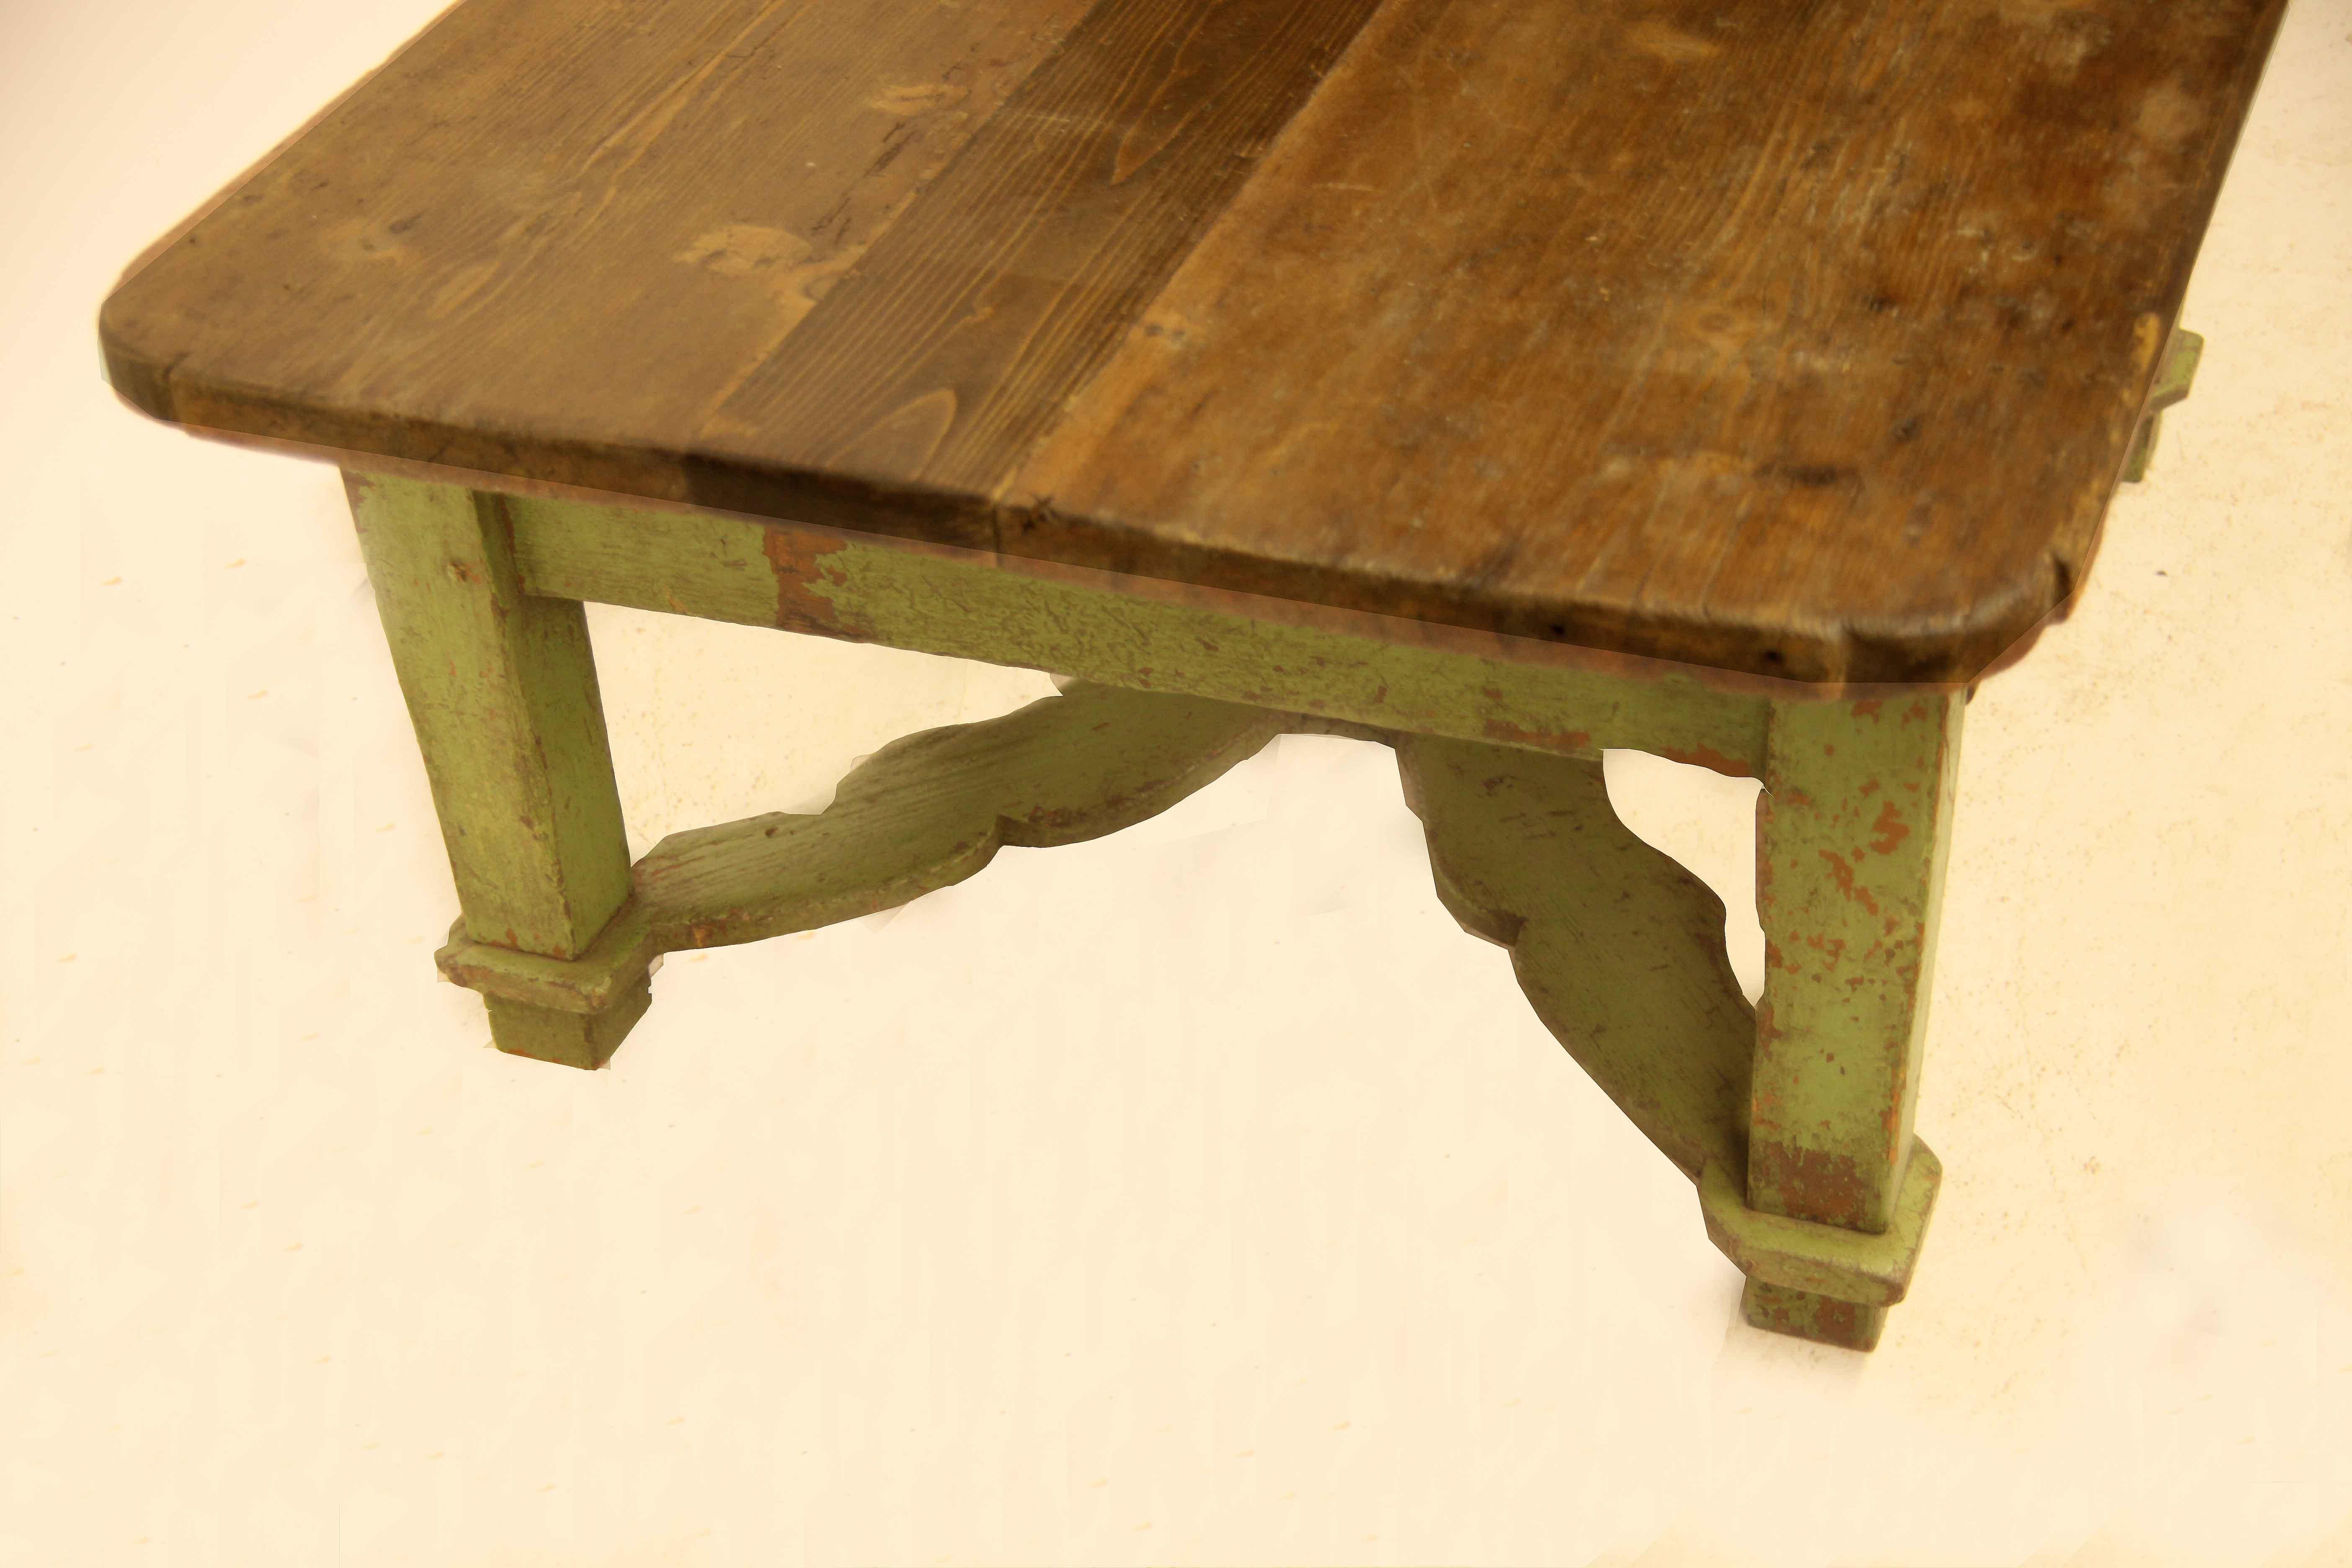 Painted pine Continental coffee table, the scrub top with rounded corners has a wax finish, single drawer with steel ring pulls. The tapered legs have a connecting ''x'' stretcher with a turned finial in the center. The top is made to slide forward